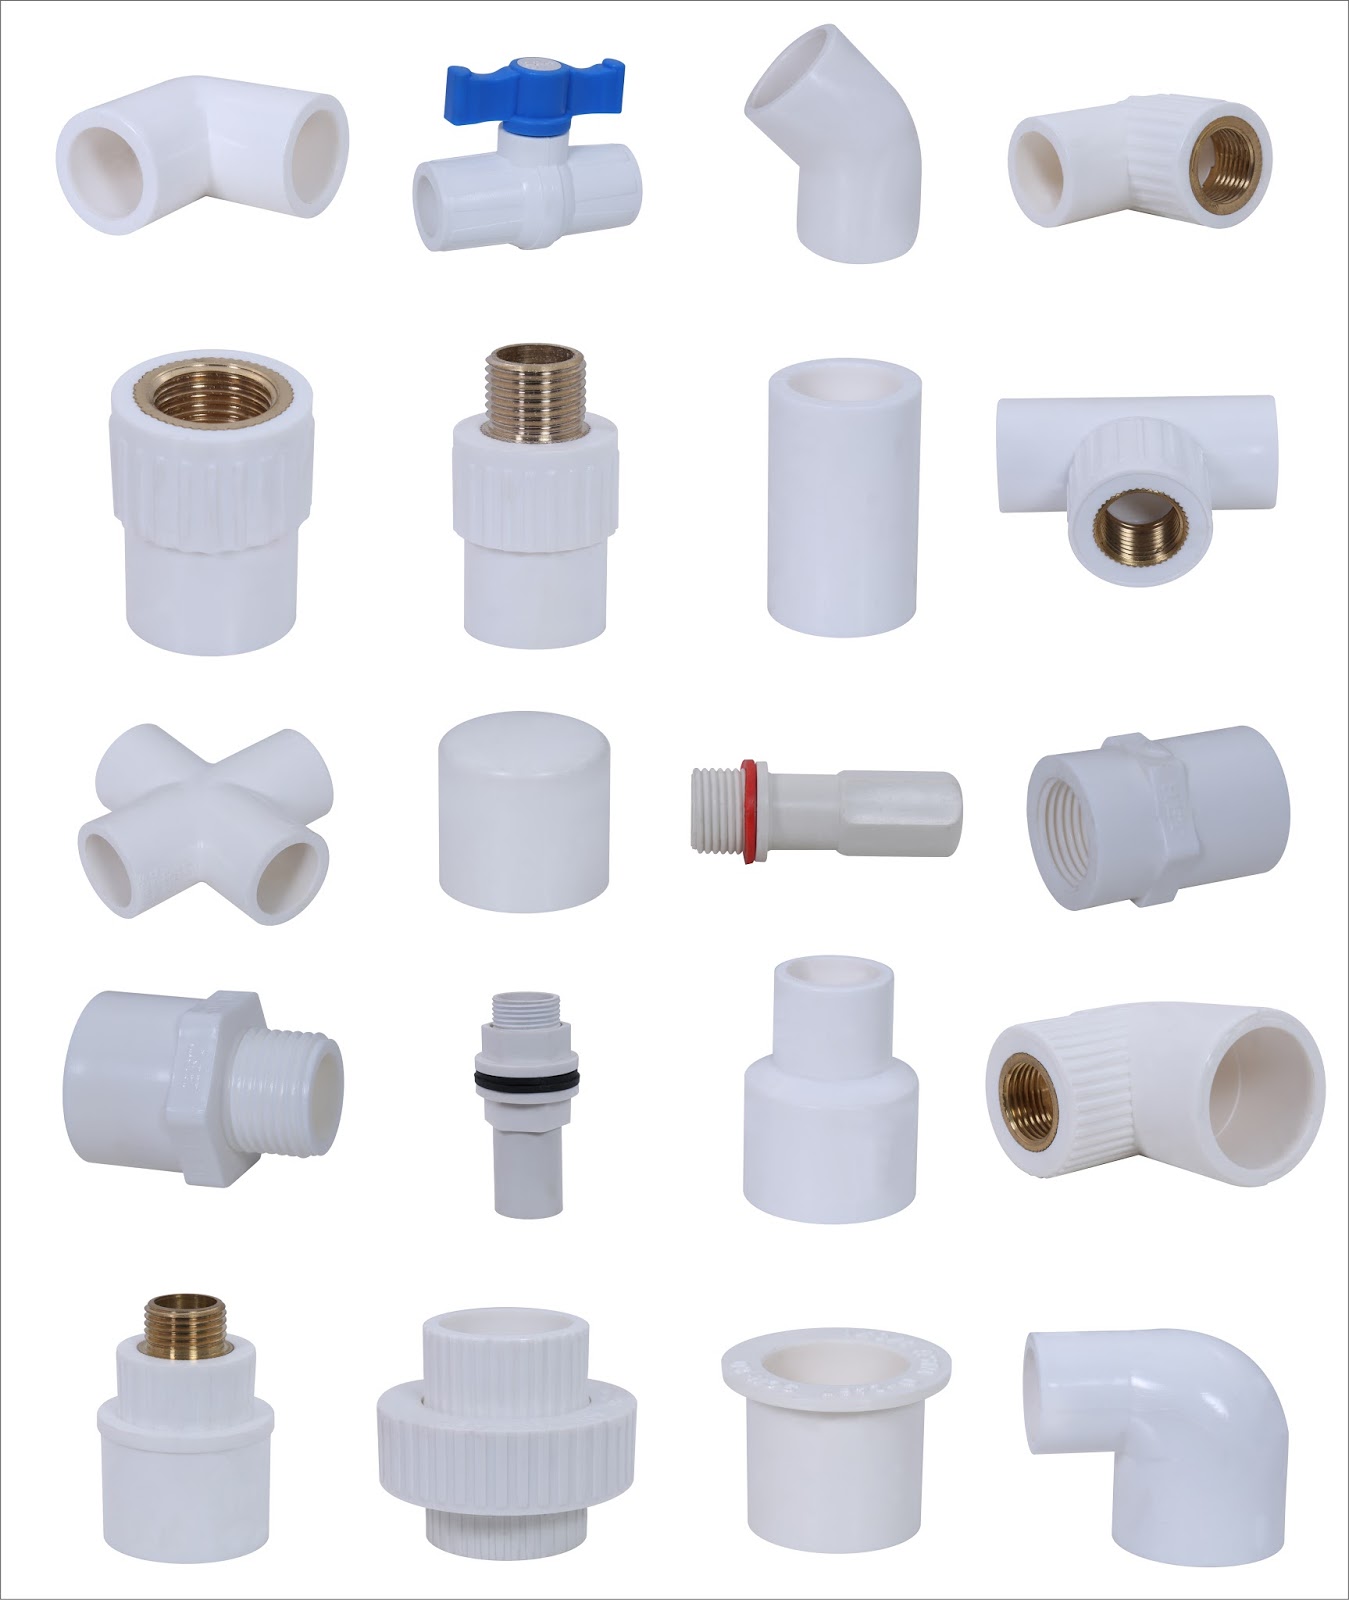 Ashok Plastic: UPVC Pipe Fittings Application and Categories